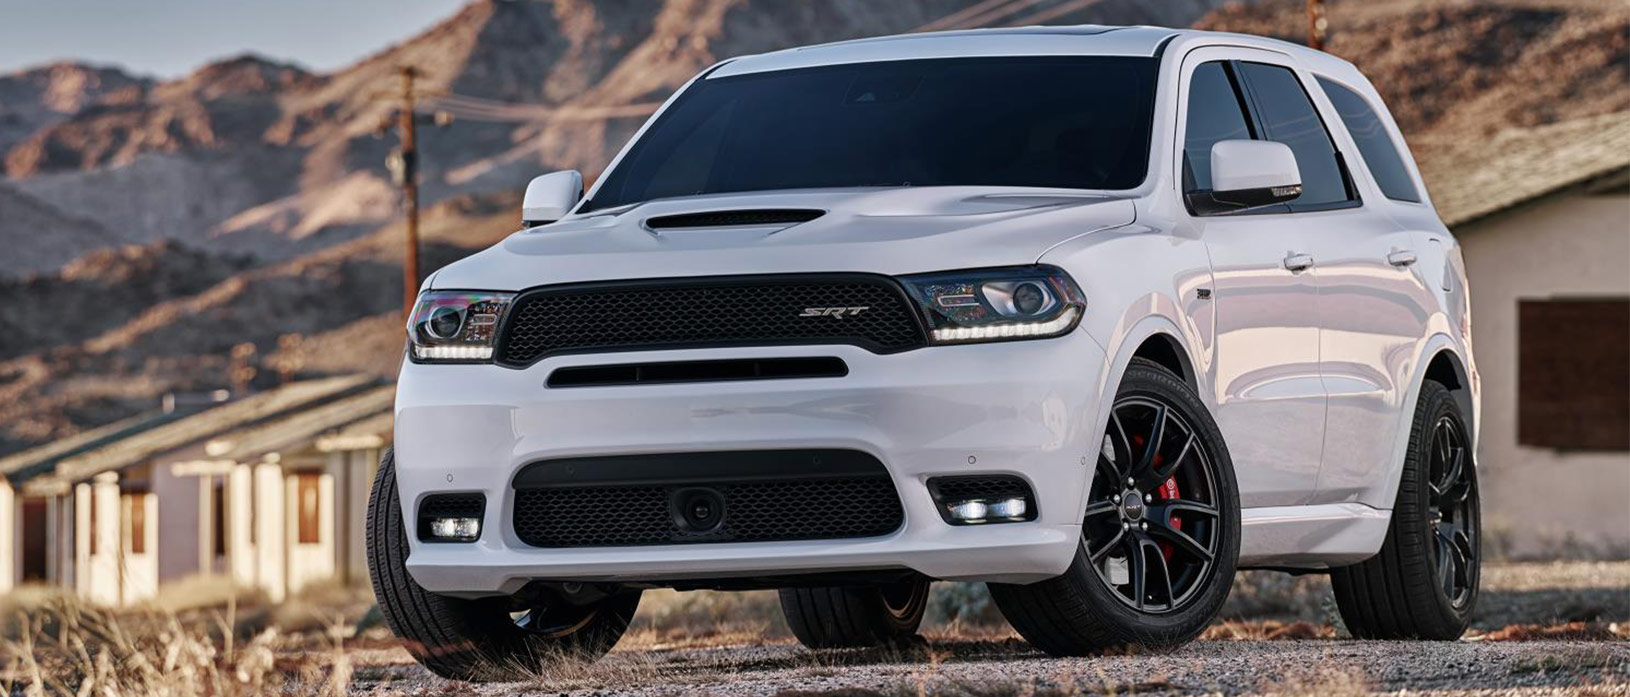 475-HP Dodge Durango SRT<sup>®</sup>: A Truck That Packs the Muscle